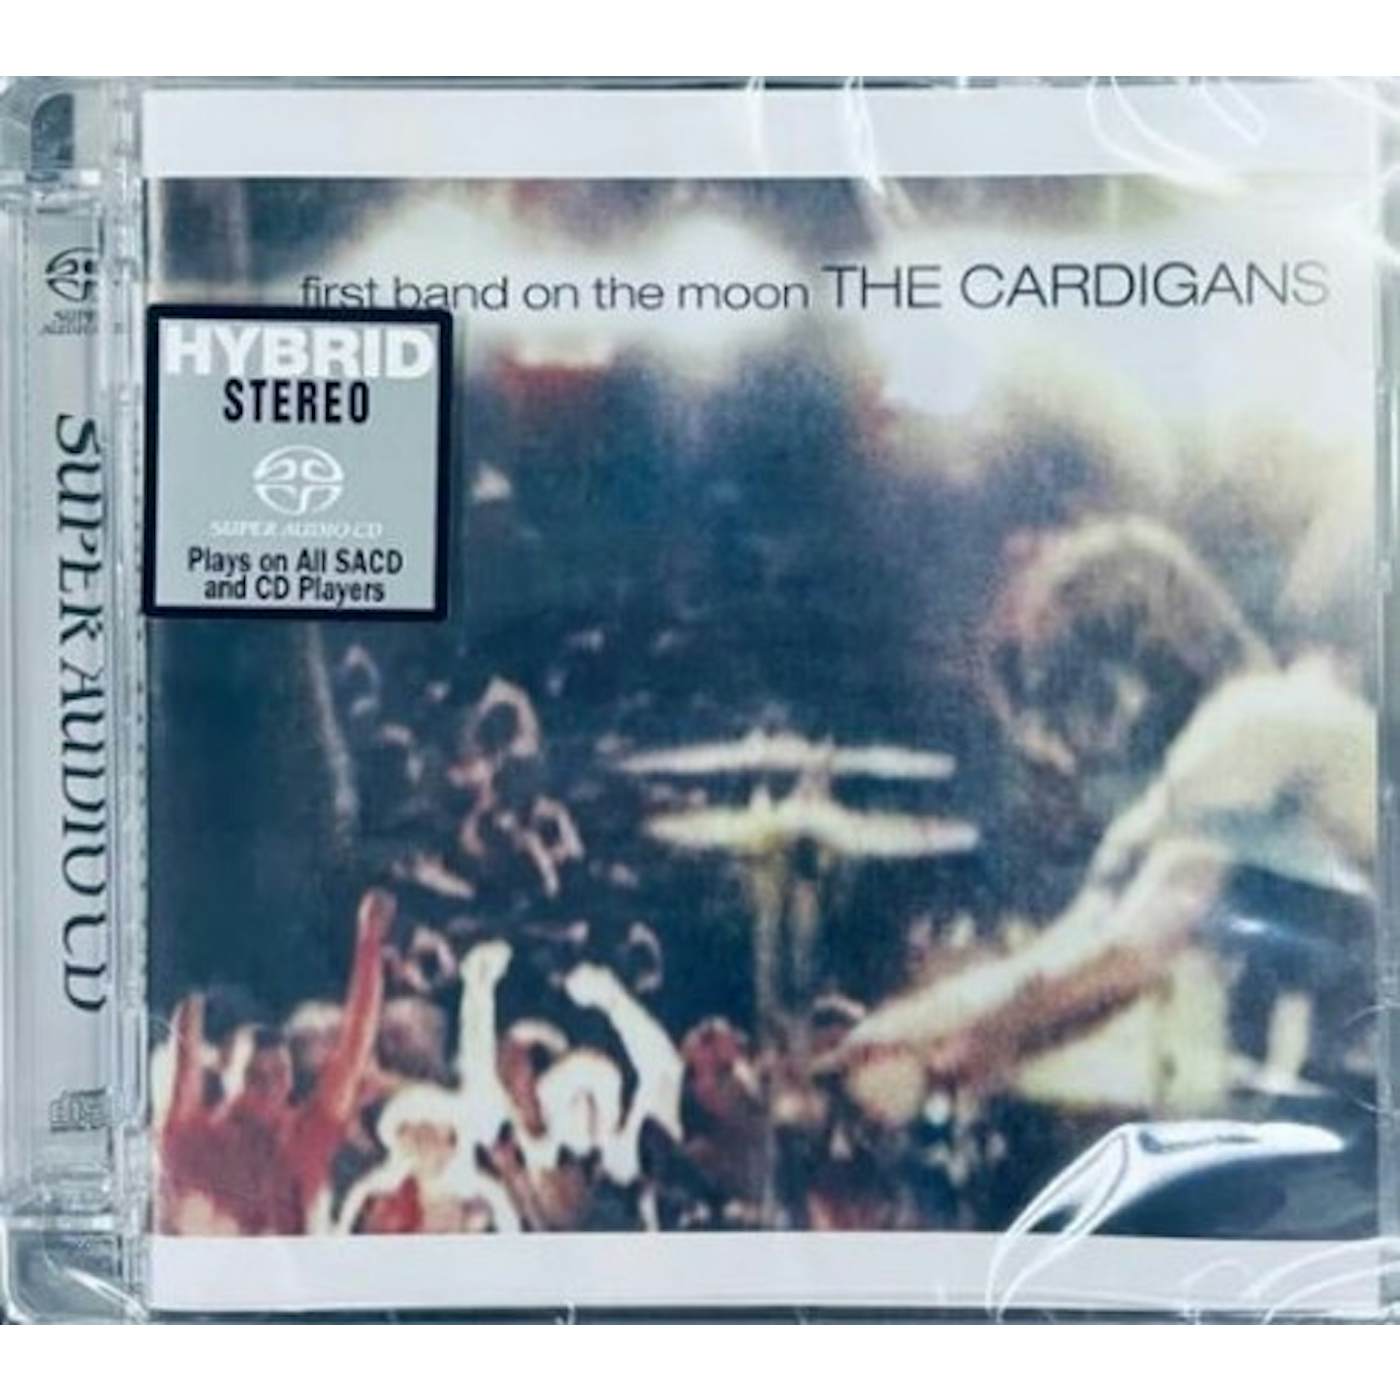 The Cardigans FIRST BAND ON THE MOON Super Audio CD